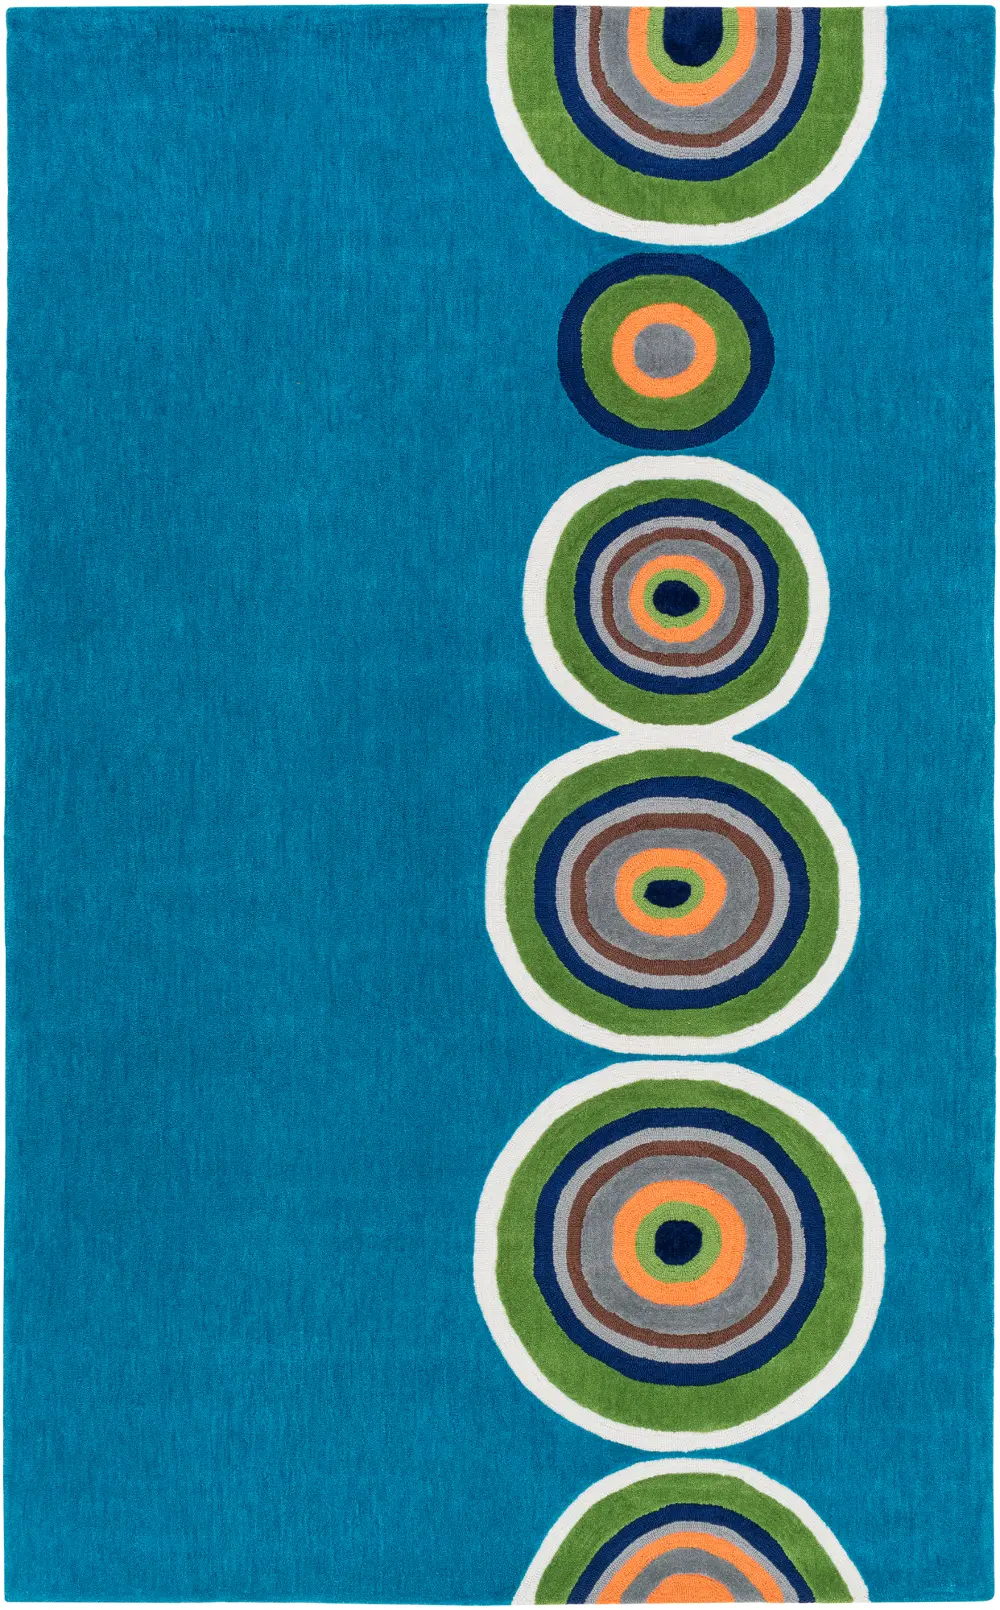 2 x 3 X-Small Blue Circles Kids Area Rug - Skidaddle-1